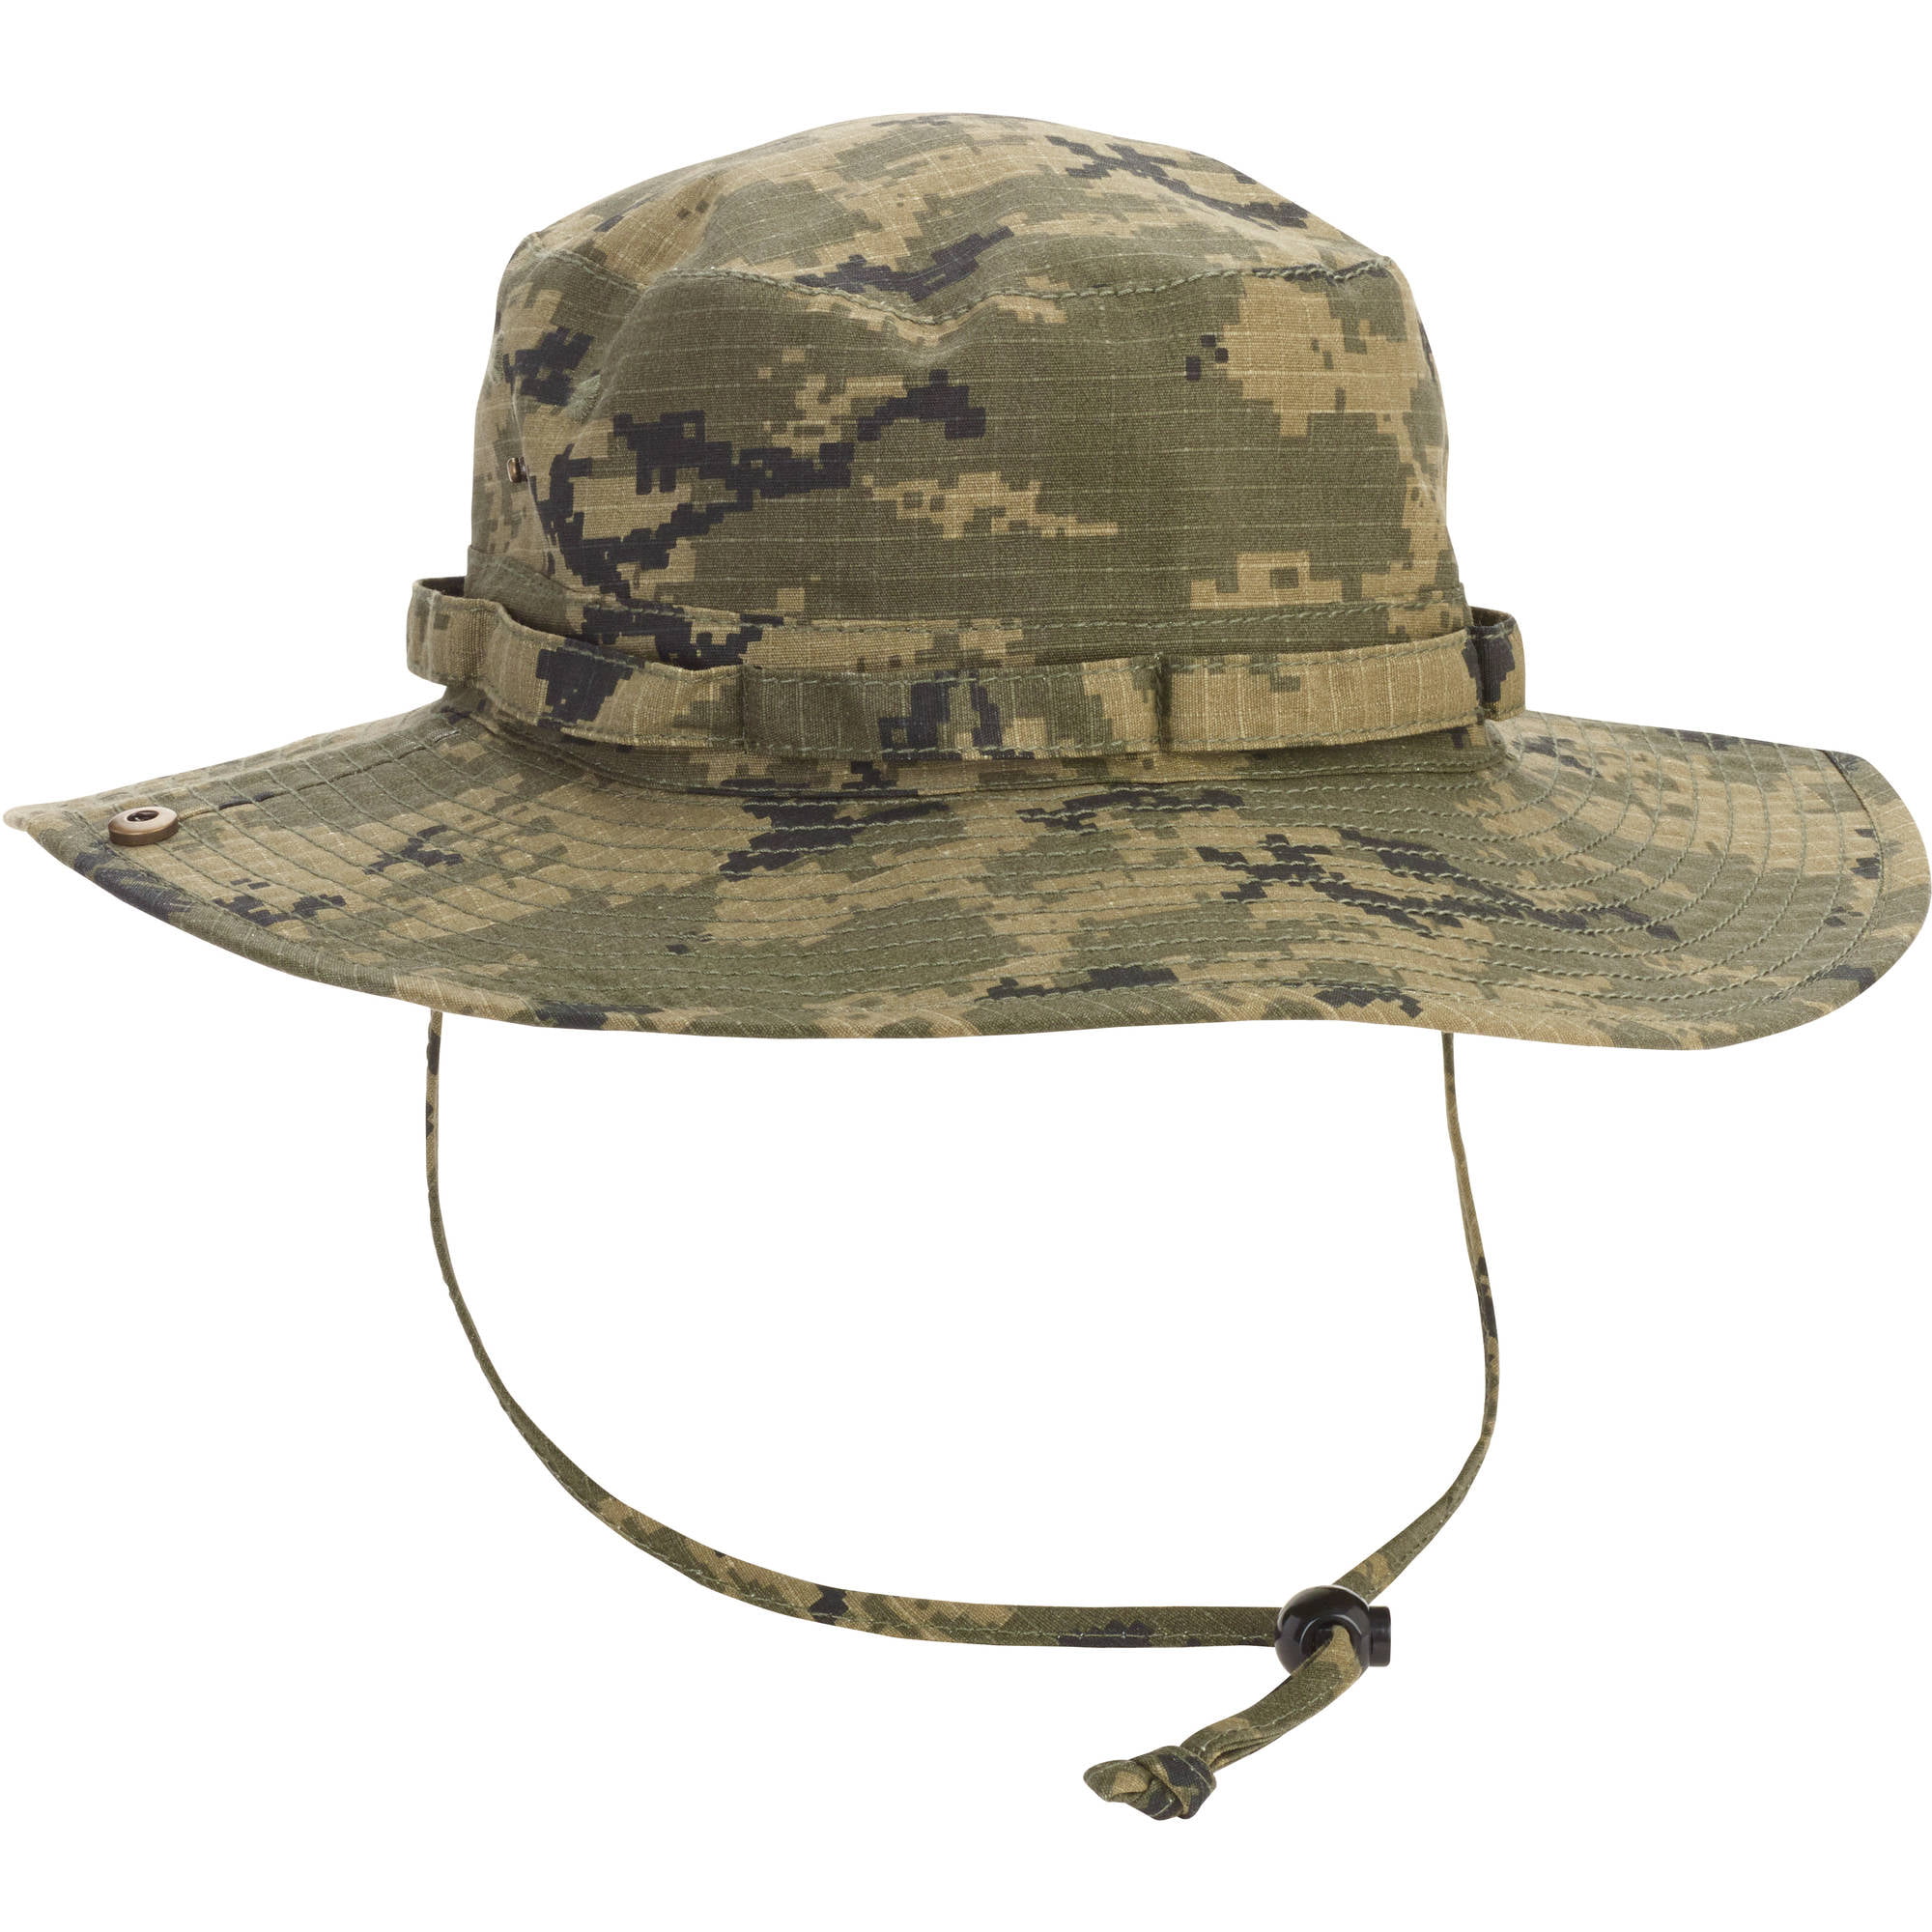 MENS ARMY STYLE BOONIE BUSH HAT CHINSTRAP CAMOUFLAGE RIPSTOP COTTON FISHING 